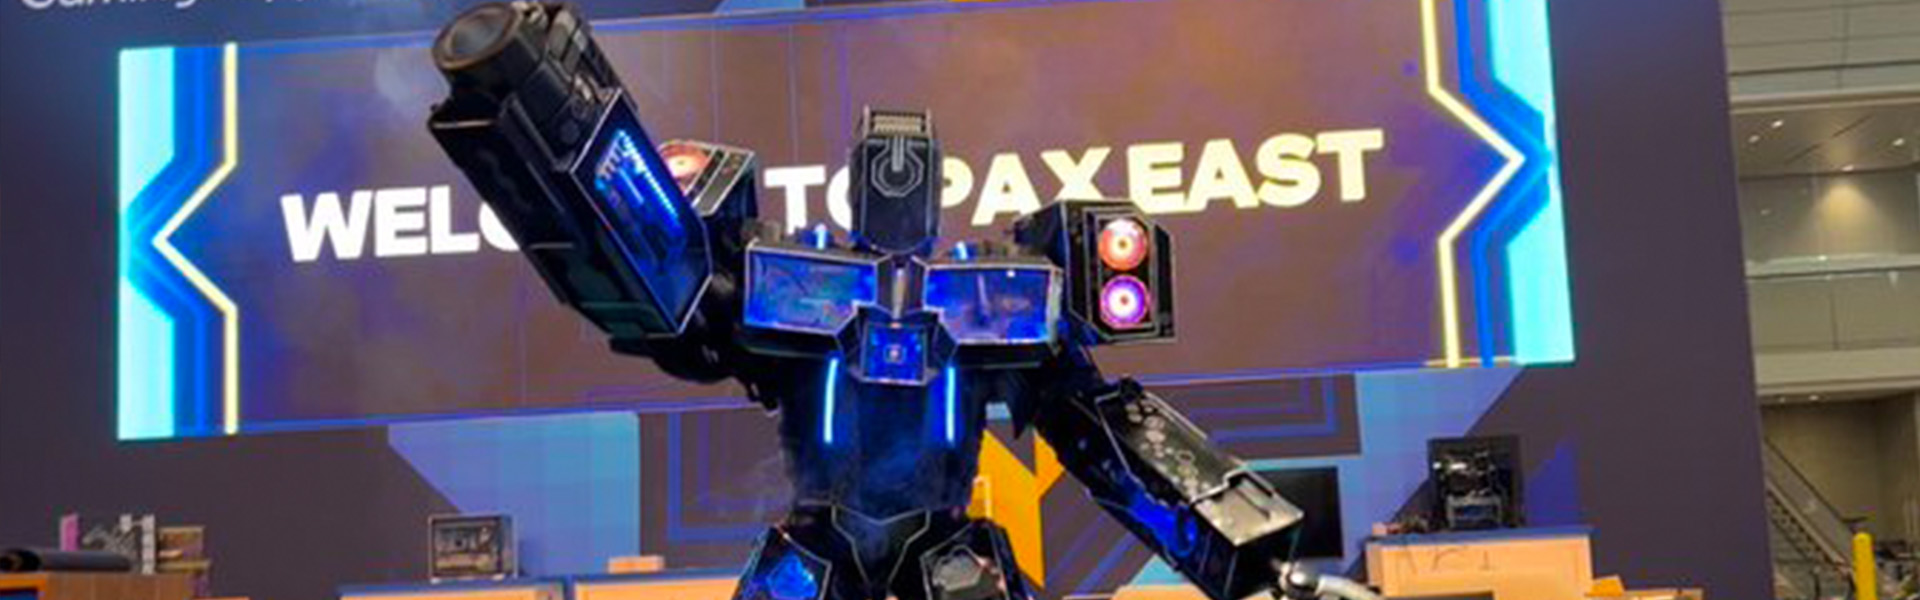 PAX East 2022 to Include Newegg Gaming PCs and Giant Robot Costume